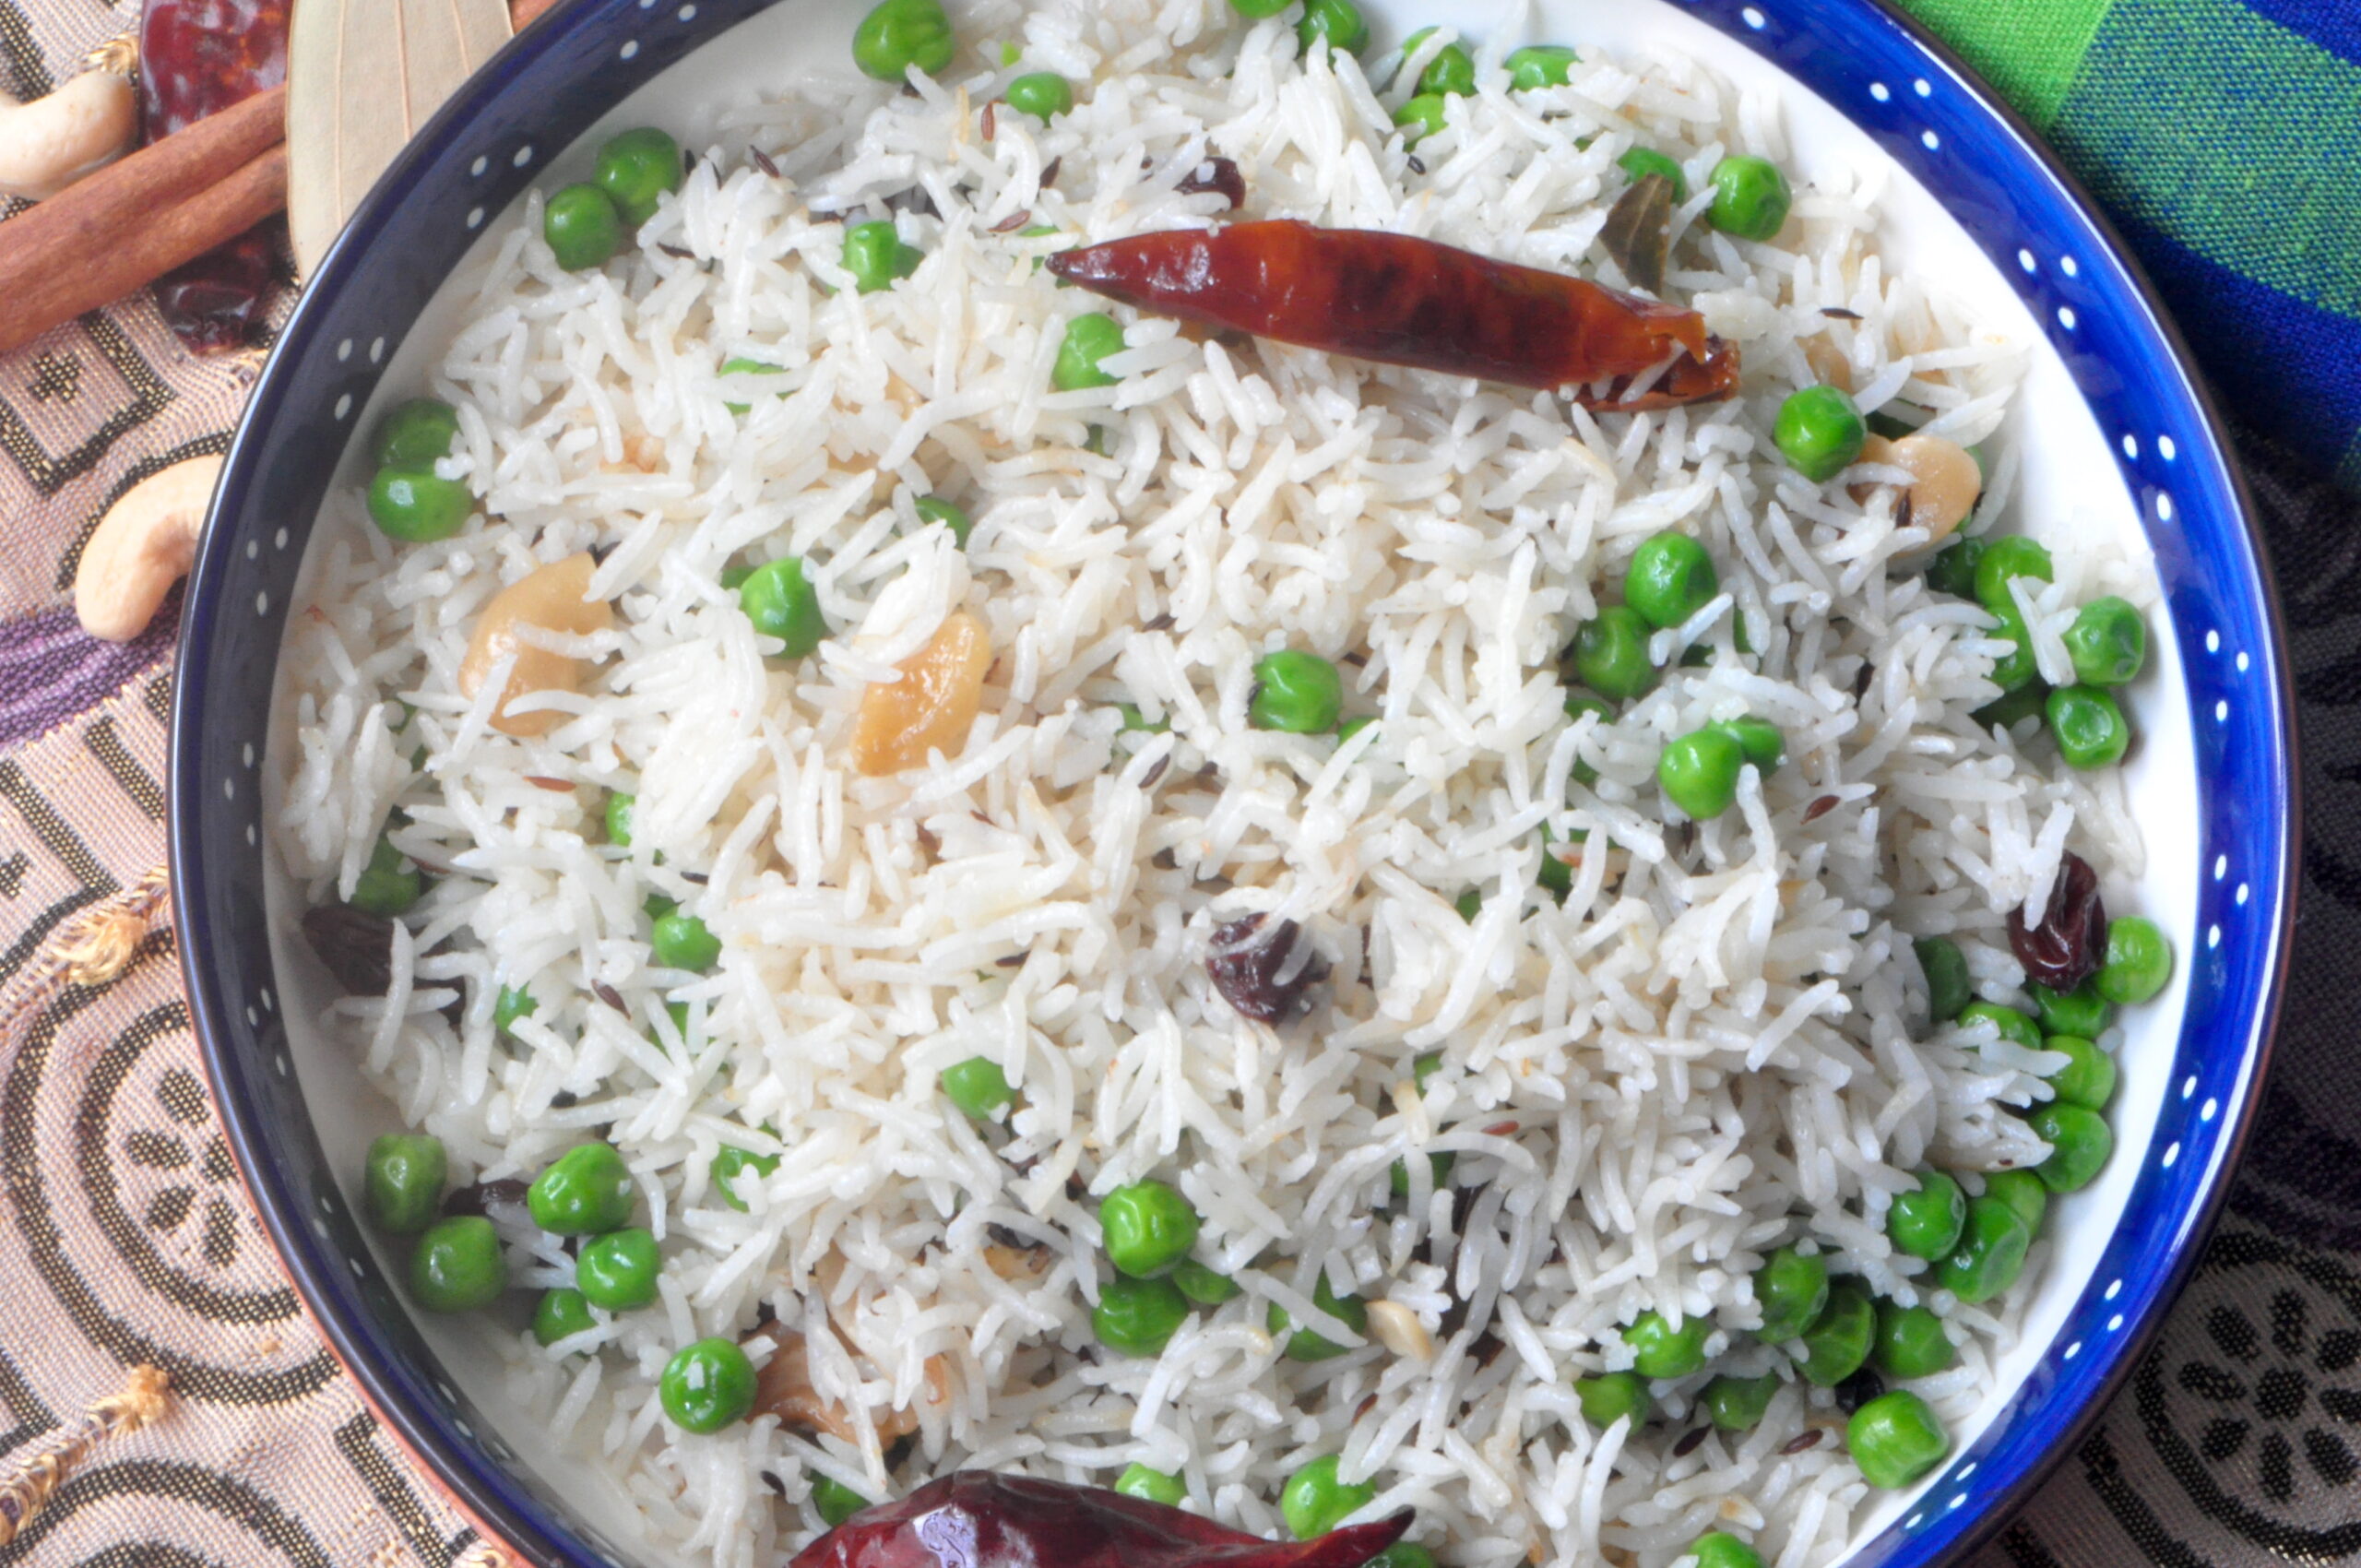 peas pulao in a bowl